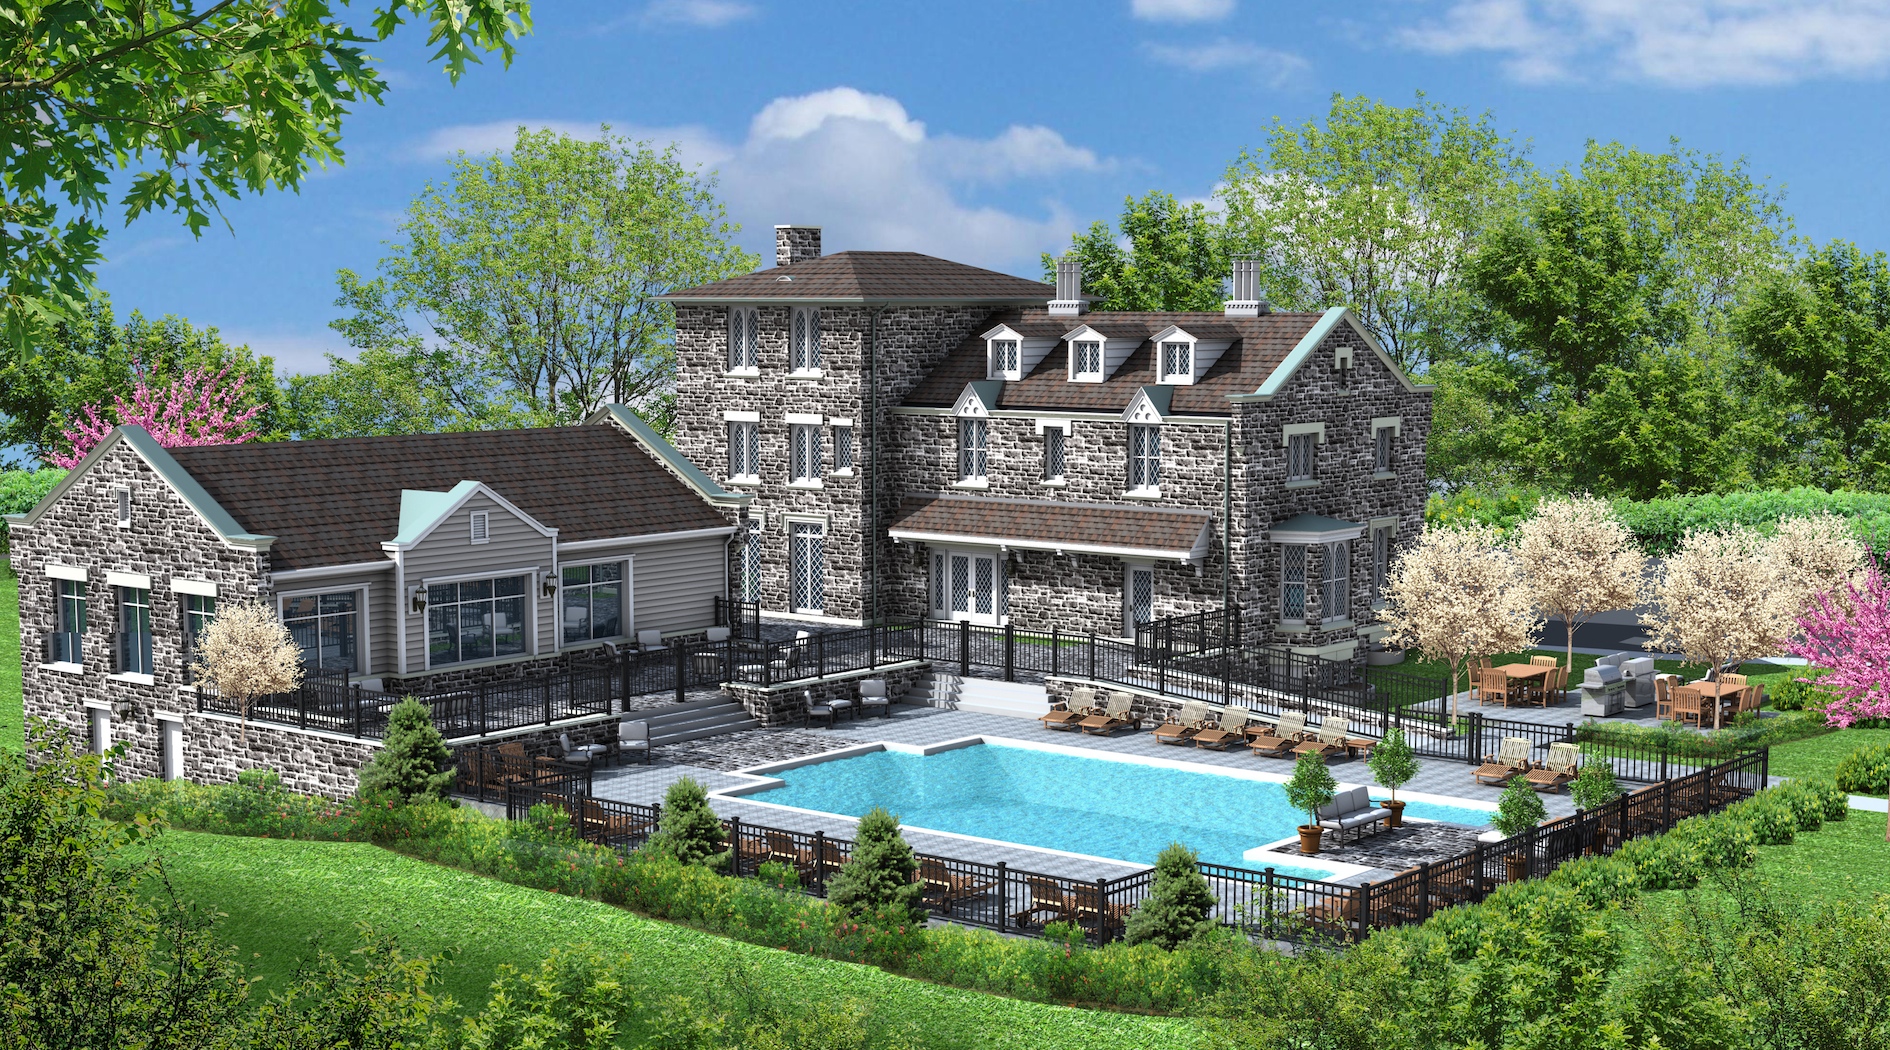 Avalon residents will have access to a clubhouse (shown above), state-of-the-art fitness center, outdoor swimming pool, children’s playground and WiFi Café